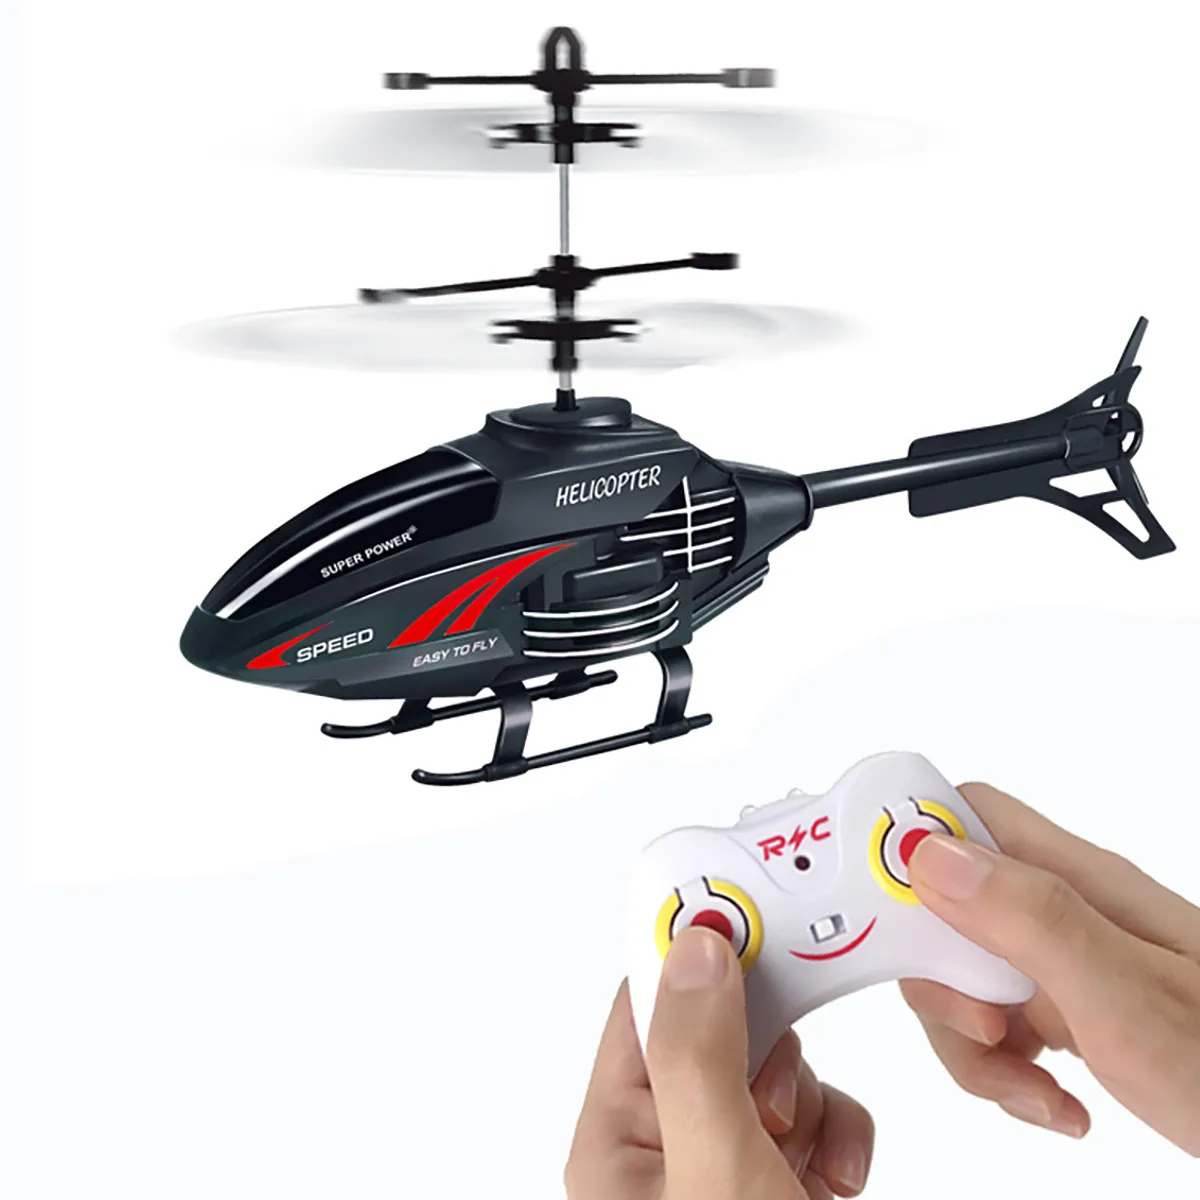 R/C ELECTRIC FLYING BALL HELICOPTER REMOTE CONTROL LED LIGHTS TOYS KIDS GIFT NEW 